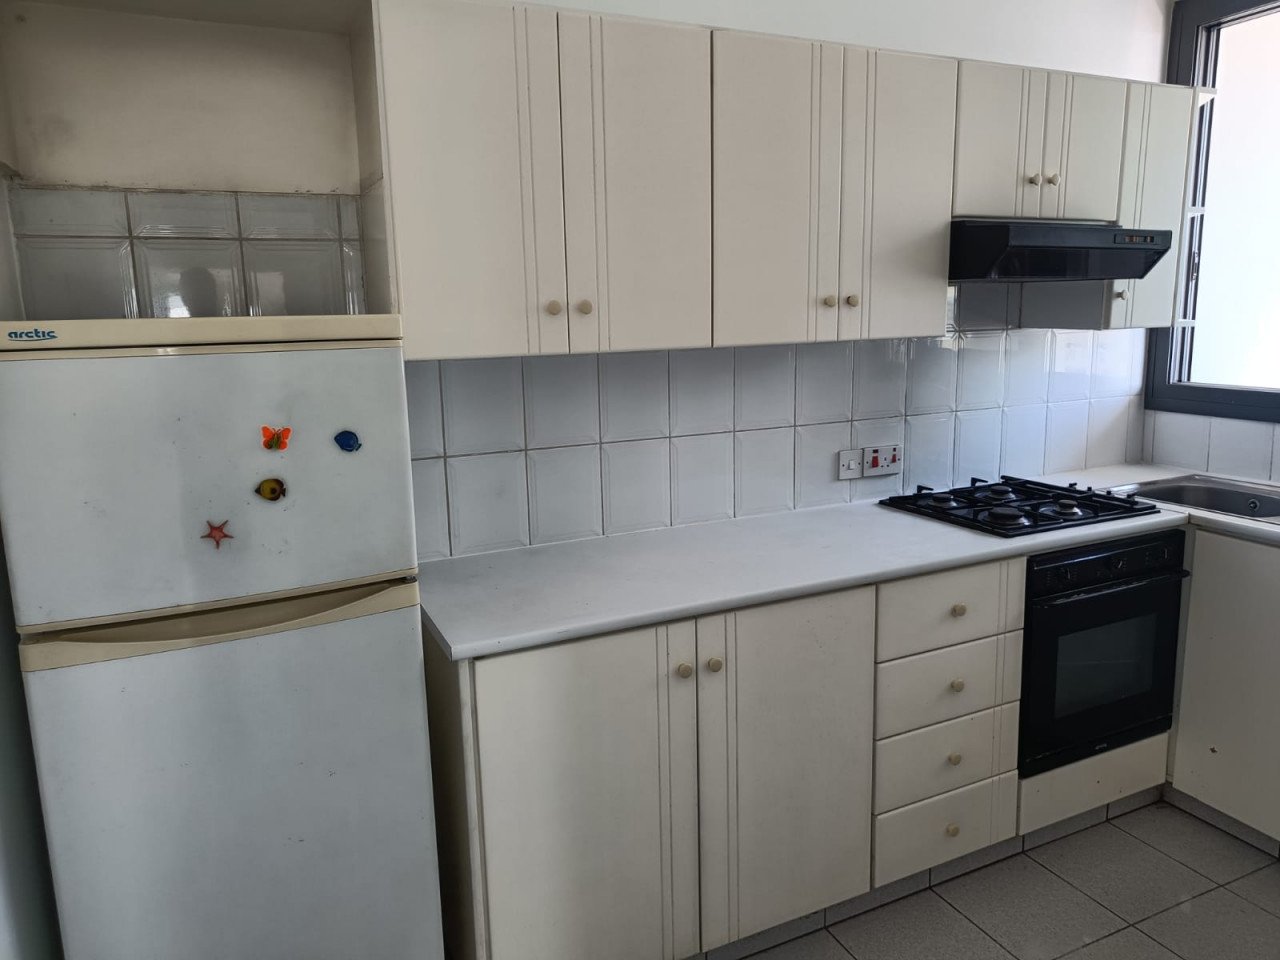 For Rent: Apartments, Strovolos, Nicosia, Cyprus FC-39059 - #9